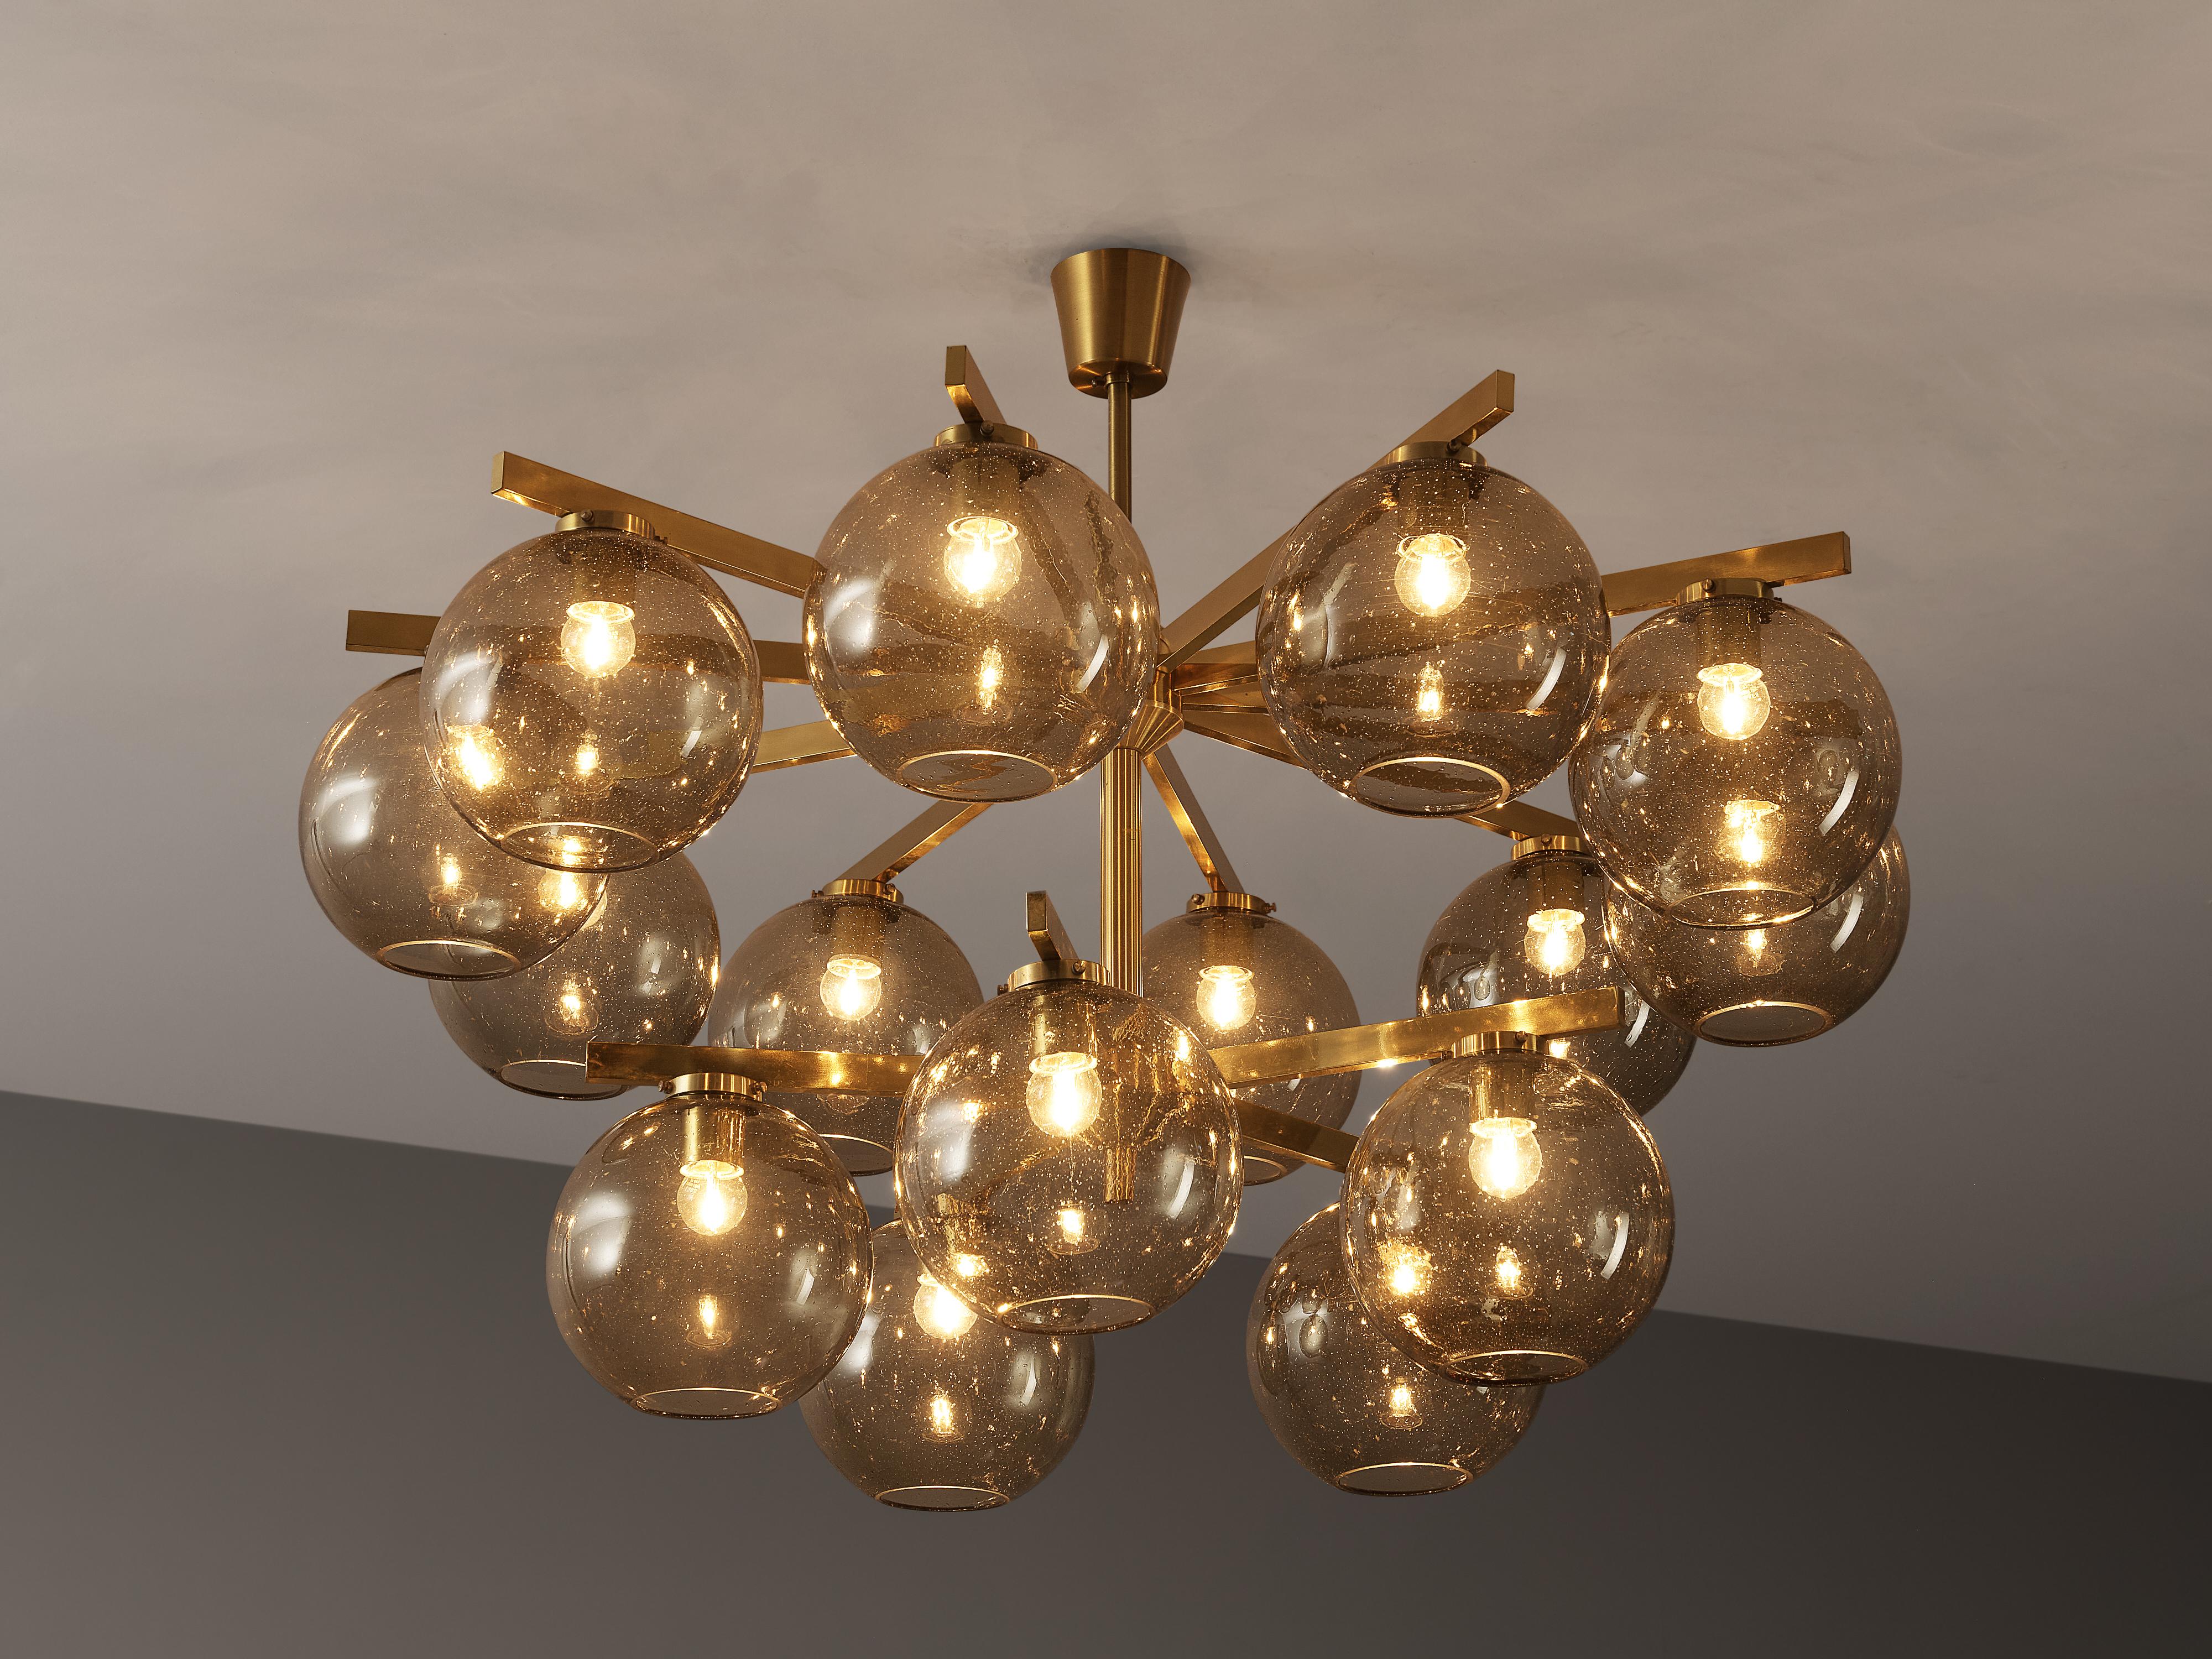 Chandelier, brass, smoked glass, Scandinavia, 1960s

This wonderful chandelier strongly resembles the work by the Swedish designer Hans-Agne Jakobsson. Fifteen smoked glass spheres are attached to the brass frames on two levels. Therefore, the